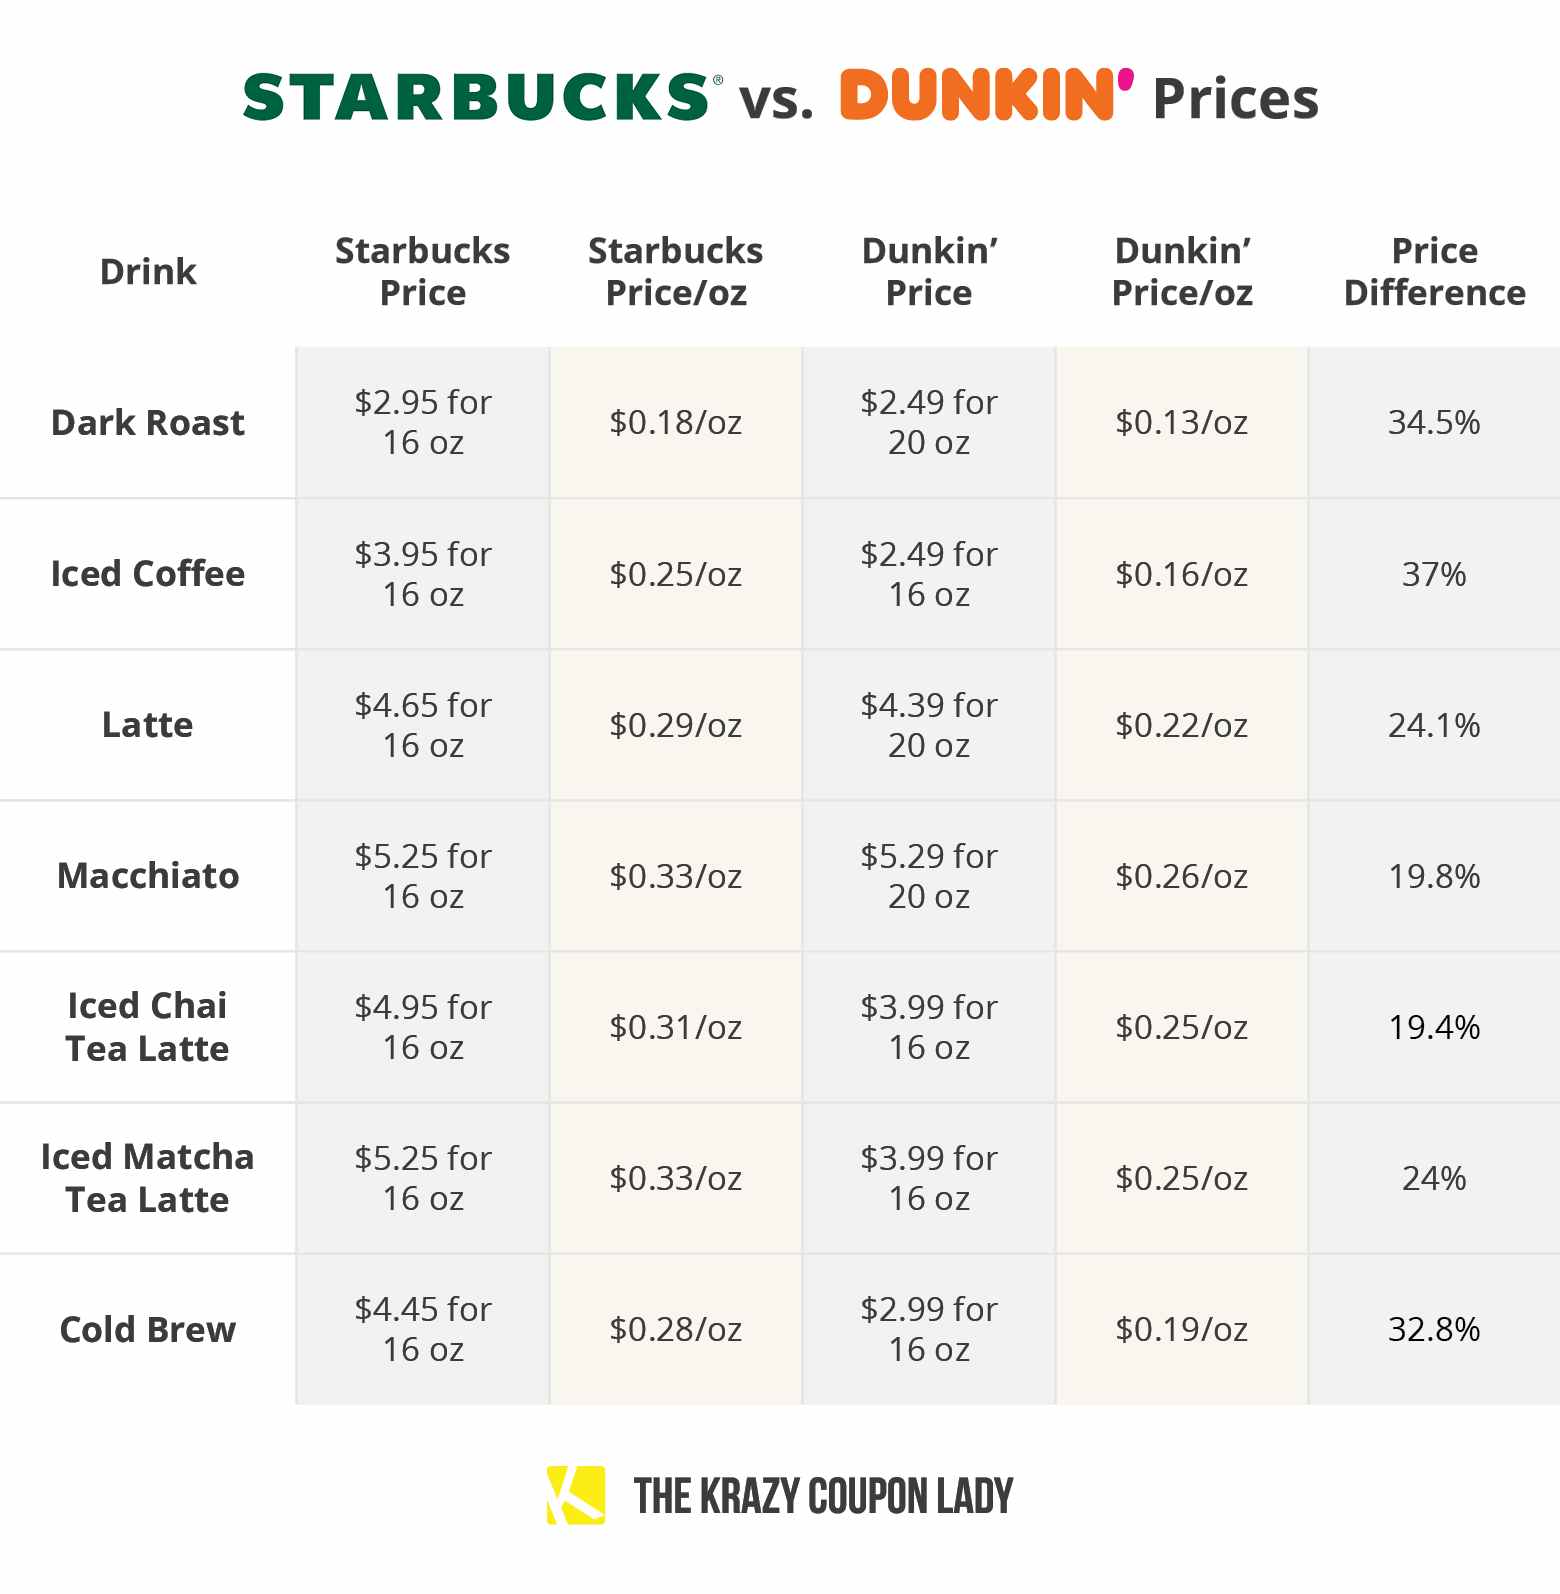 A graphic outlining the differences in prices for Starbucks versus Dunkin Donuts coffee.